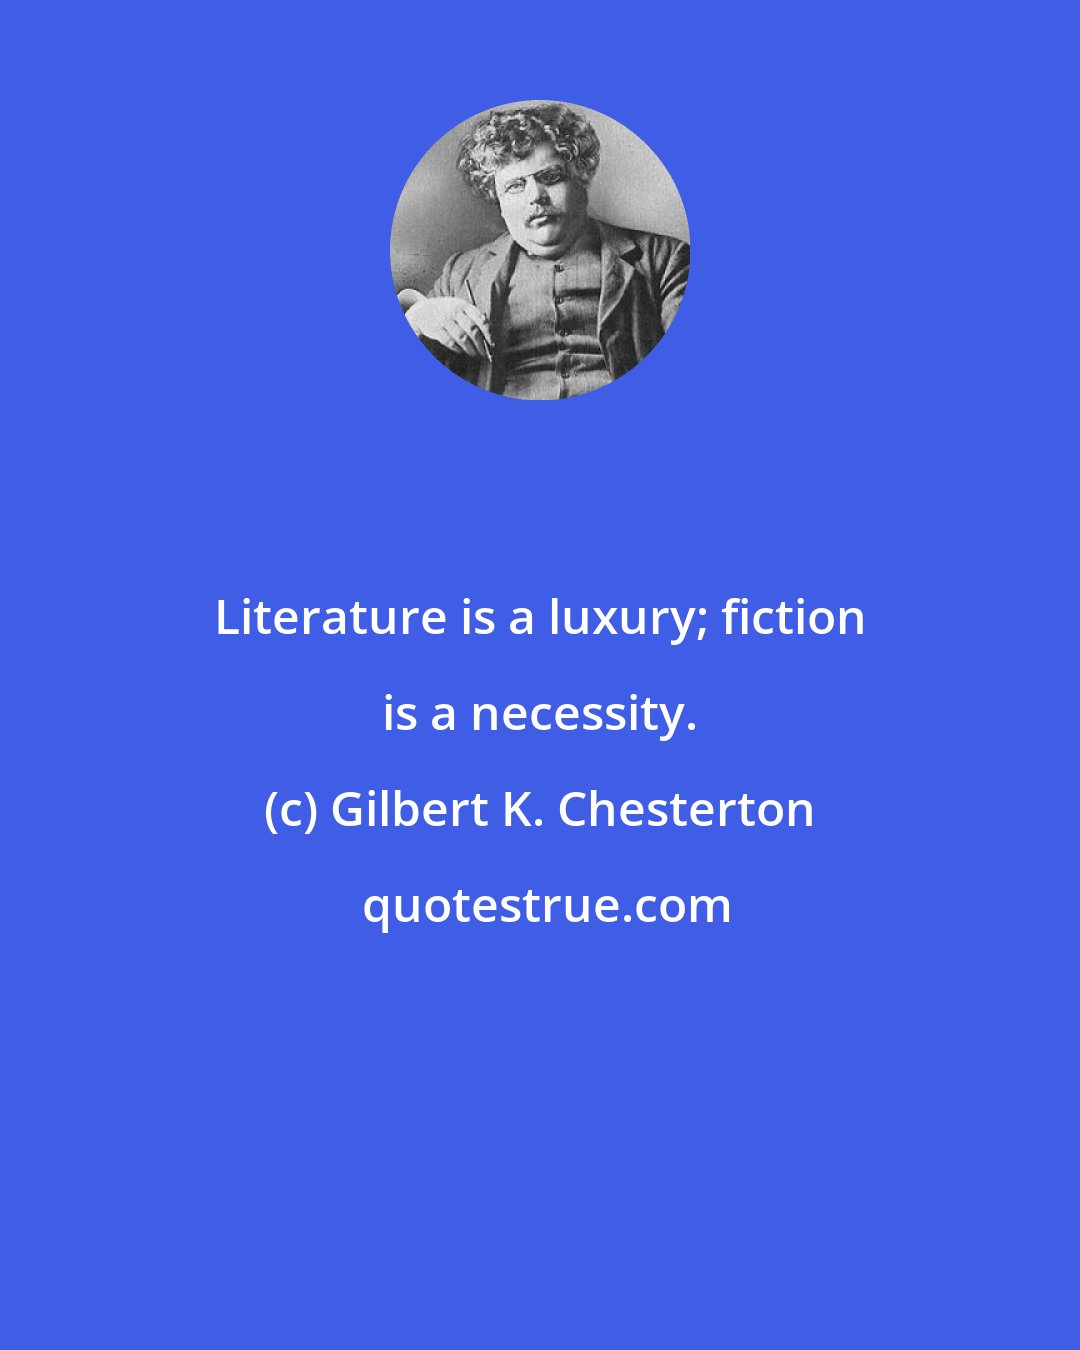 Gilbert K. Chesterton: Literature is a luxury; fiction is a necessity.